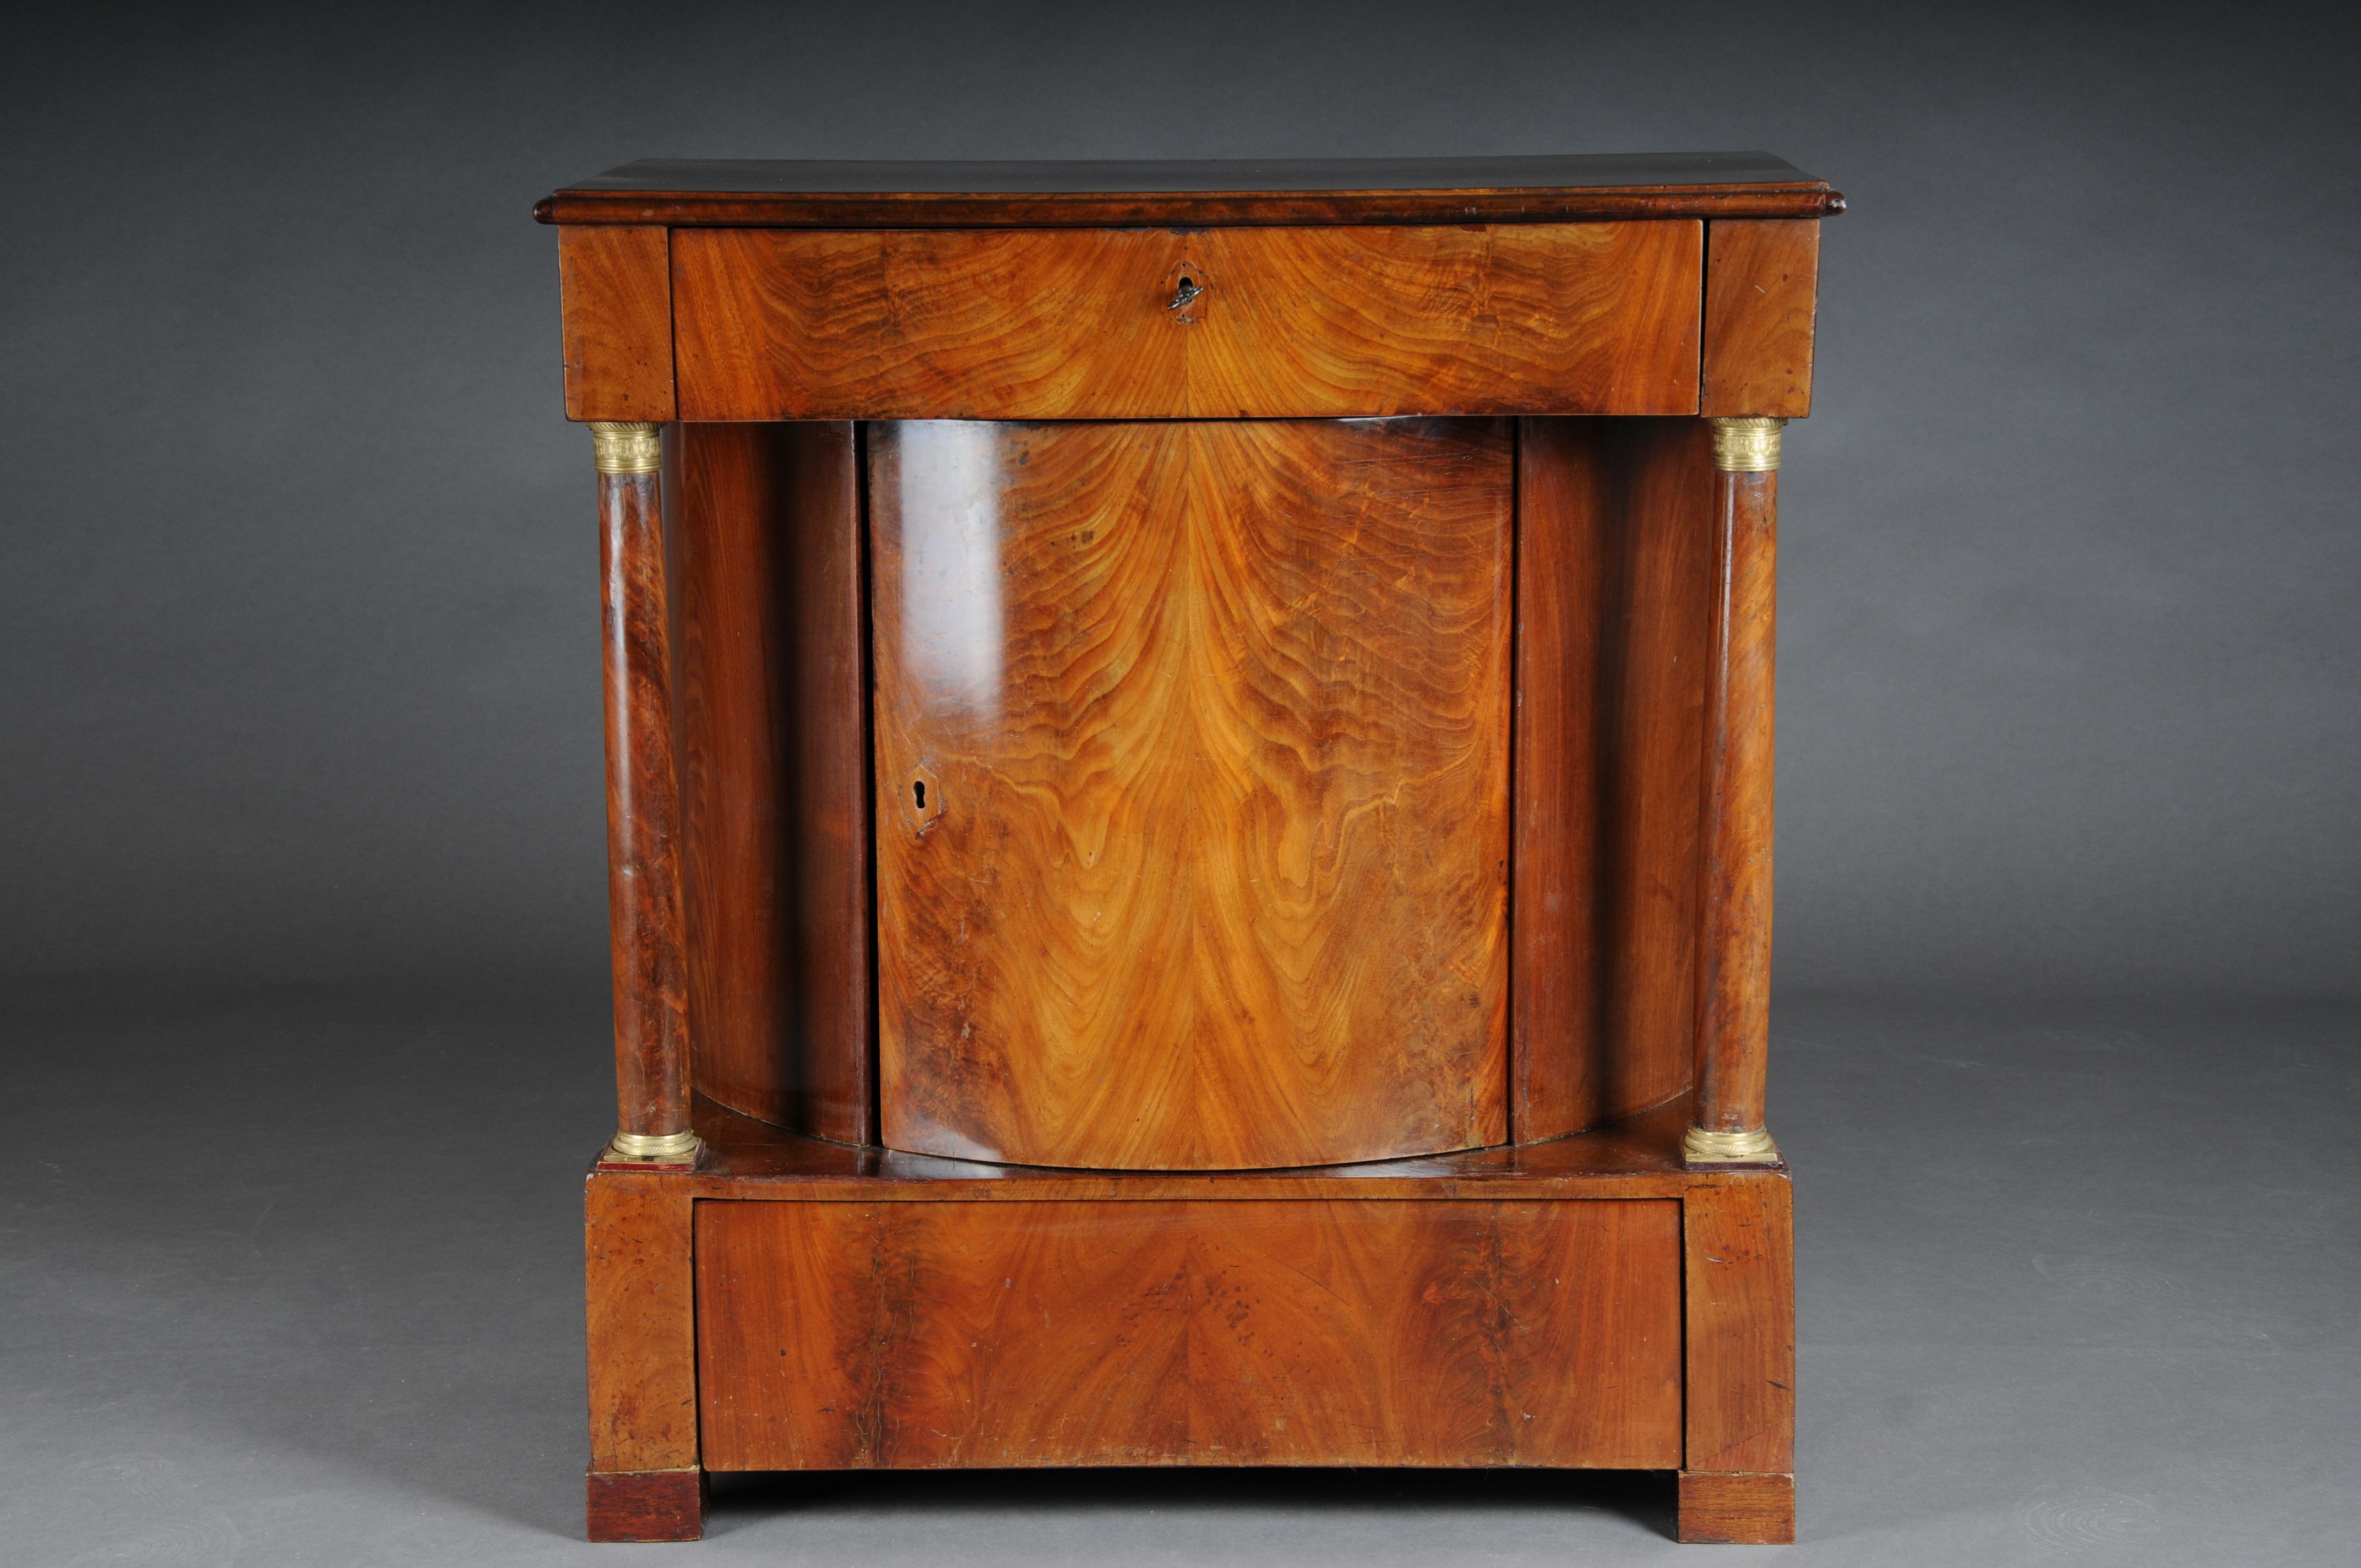 Antique half-round Empire chest of drawers, mahogany, around 1810

Semi-circular body, one door in the middle flanked by full columns and one drawer each above and below. An extremely rare chest of drawers original from the Empire period of